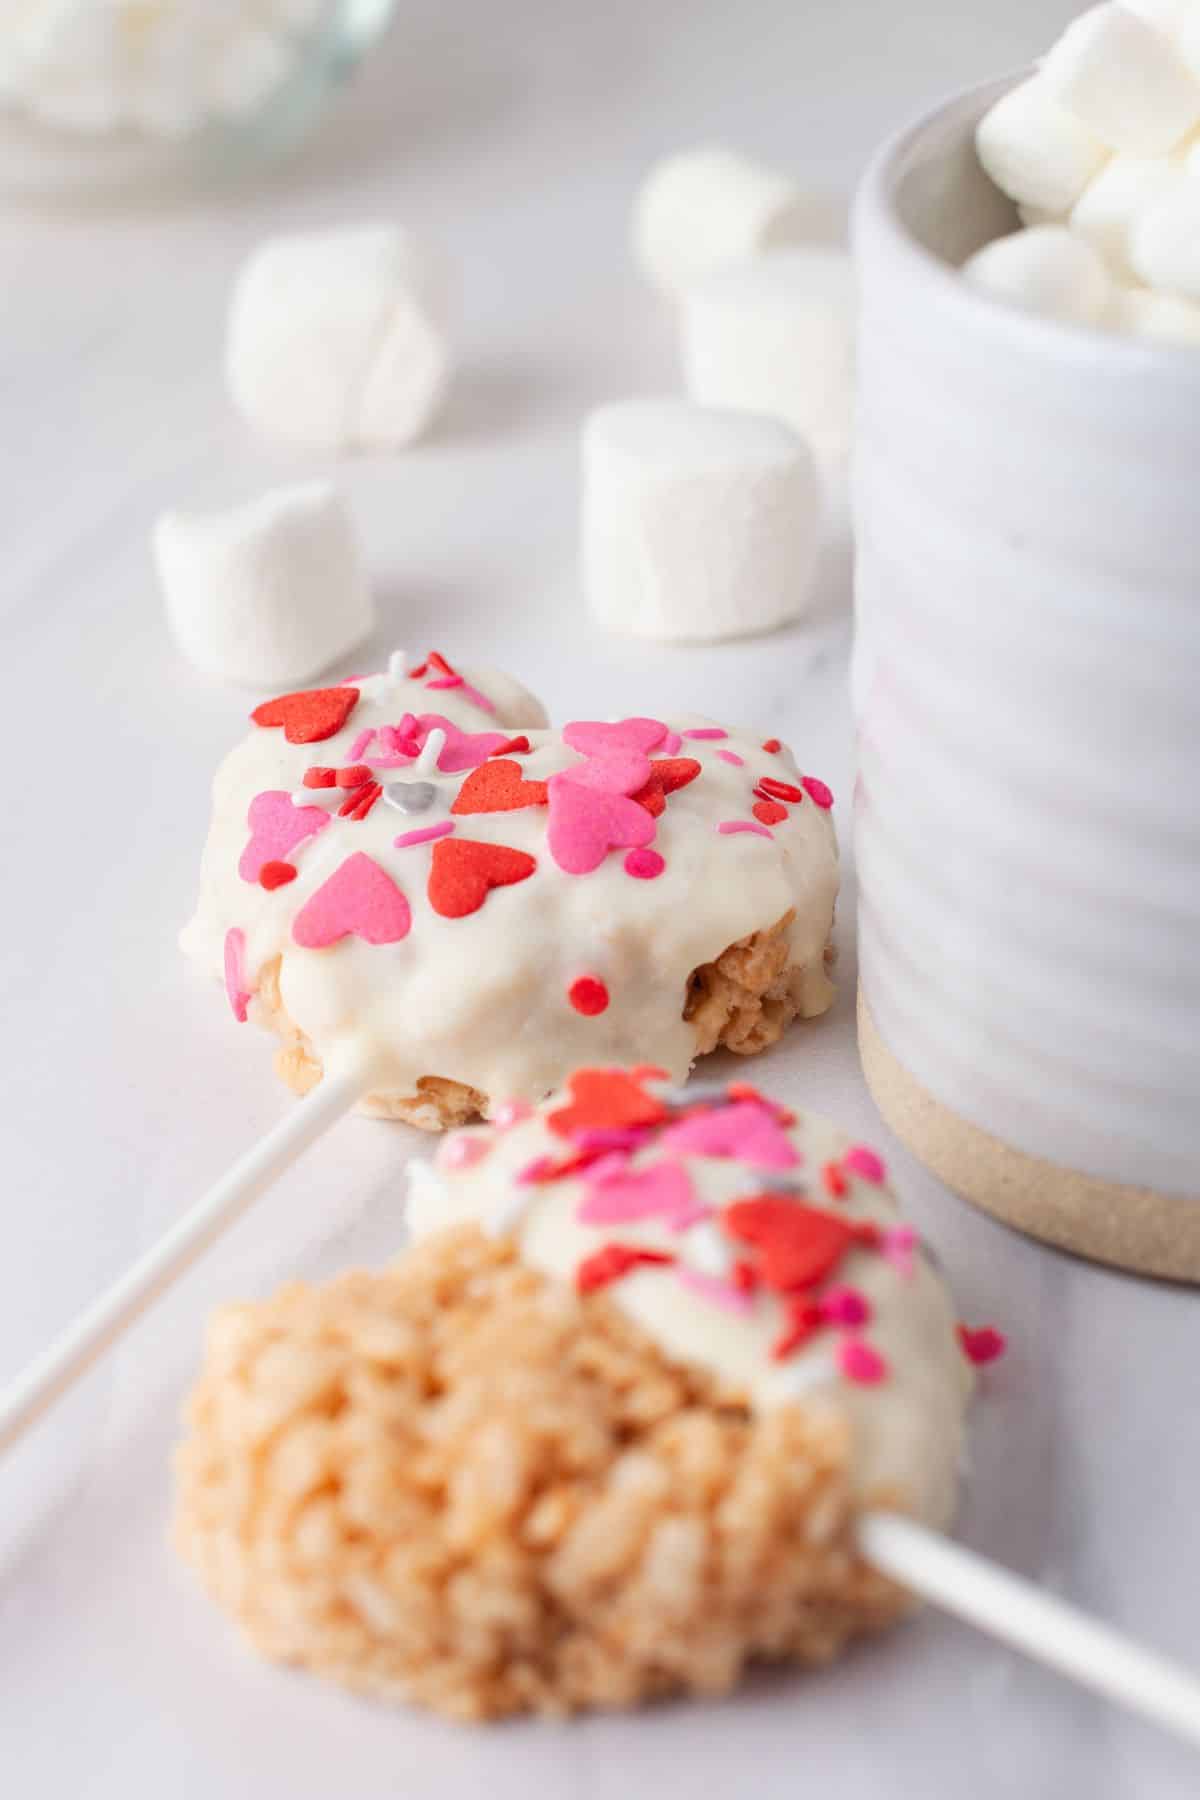 white chocolate with red sprinkles on heart krispies treat pops